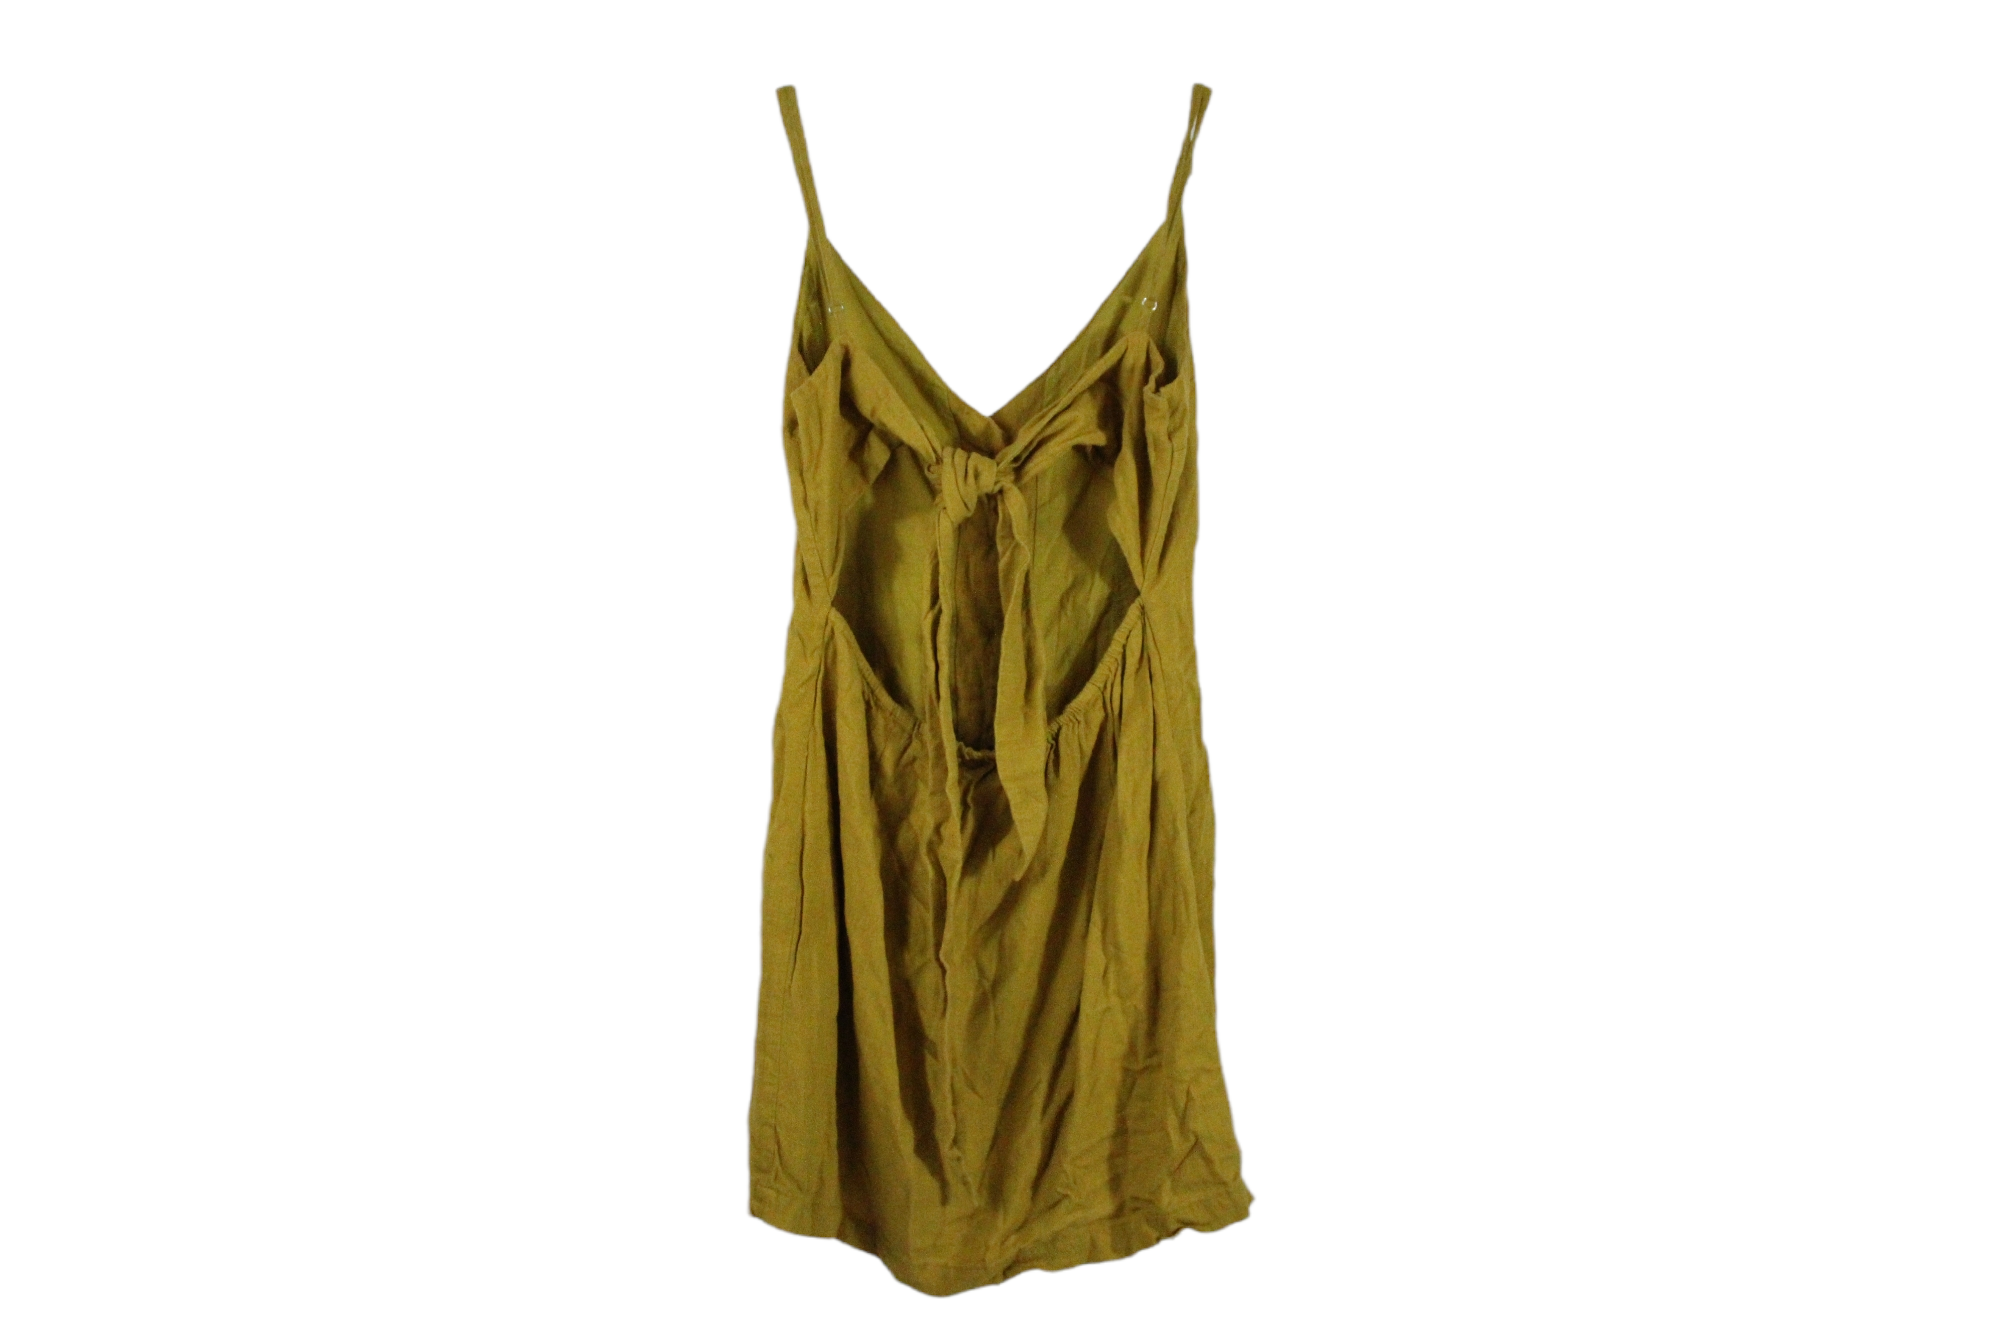 Forever 21 Mustard Yellow Cotton Dress | S